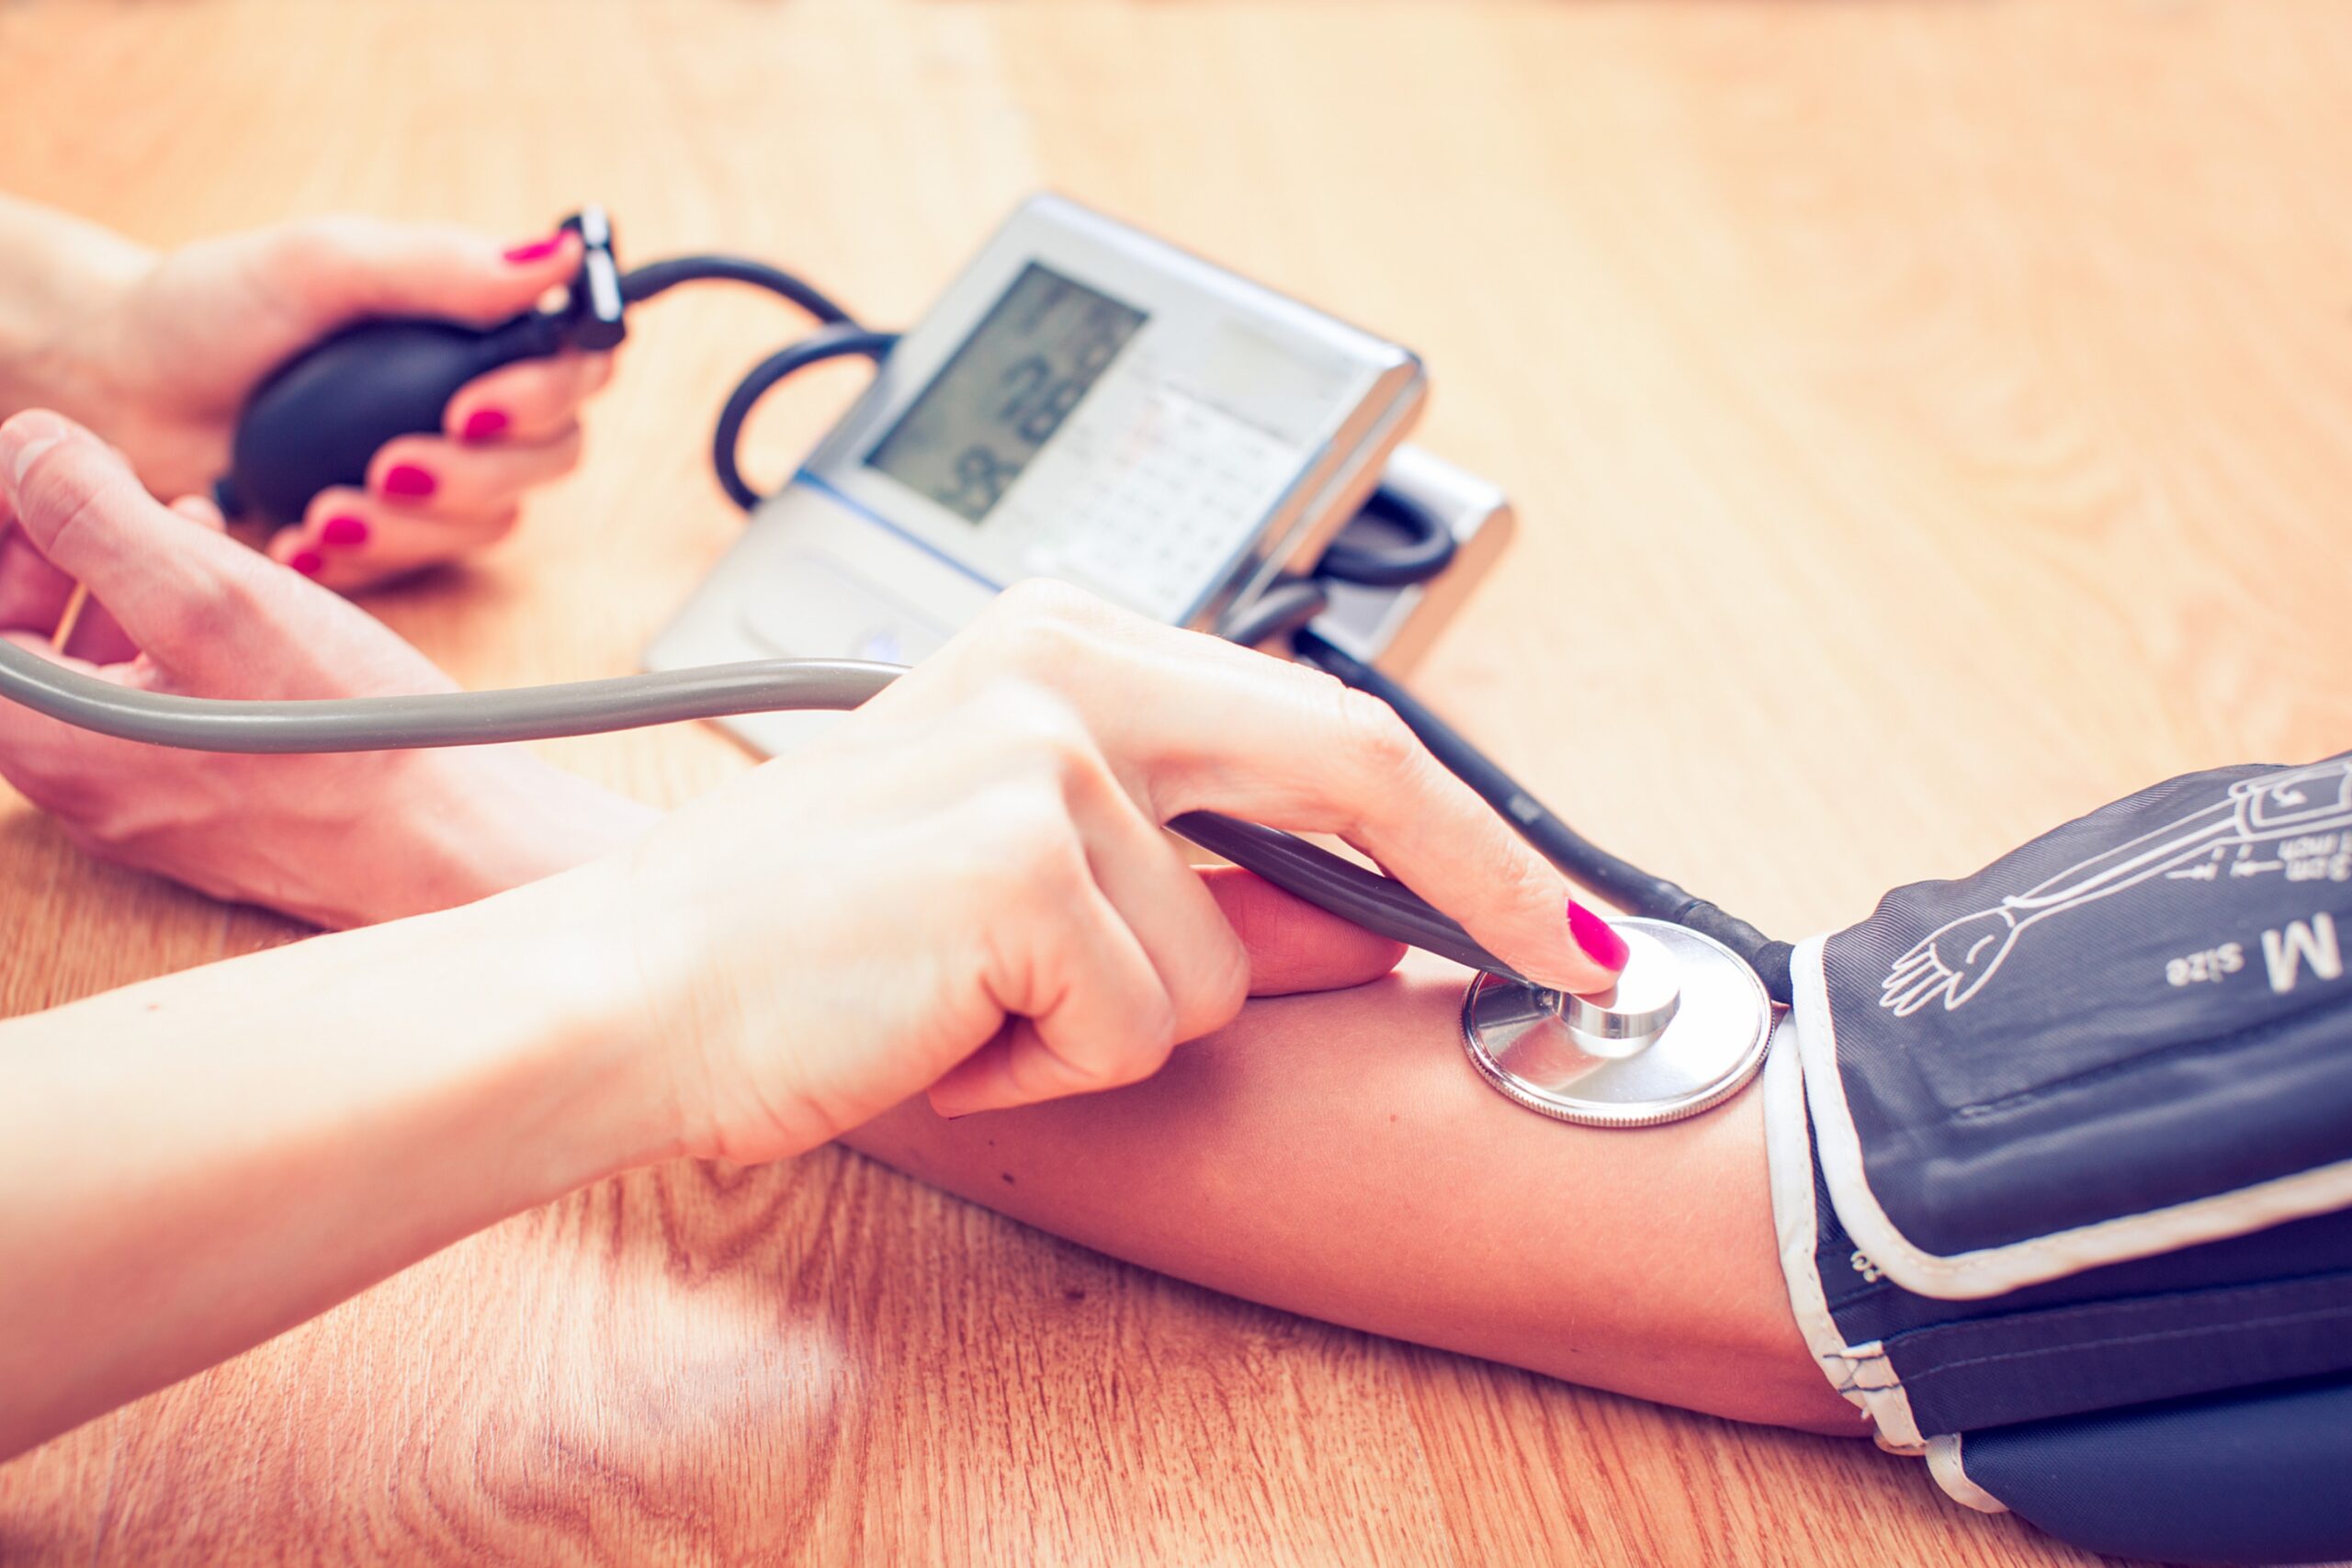 High blood pressure in your 30s is associated with worse brain health in your 70s